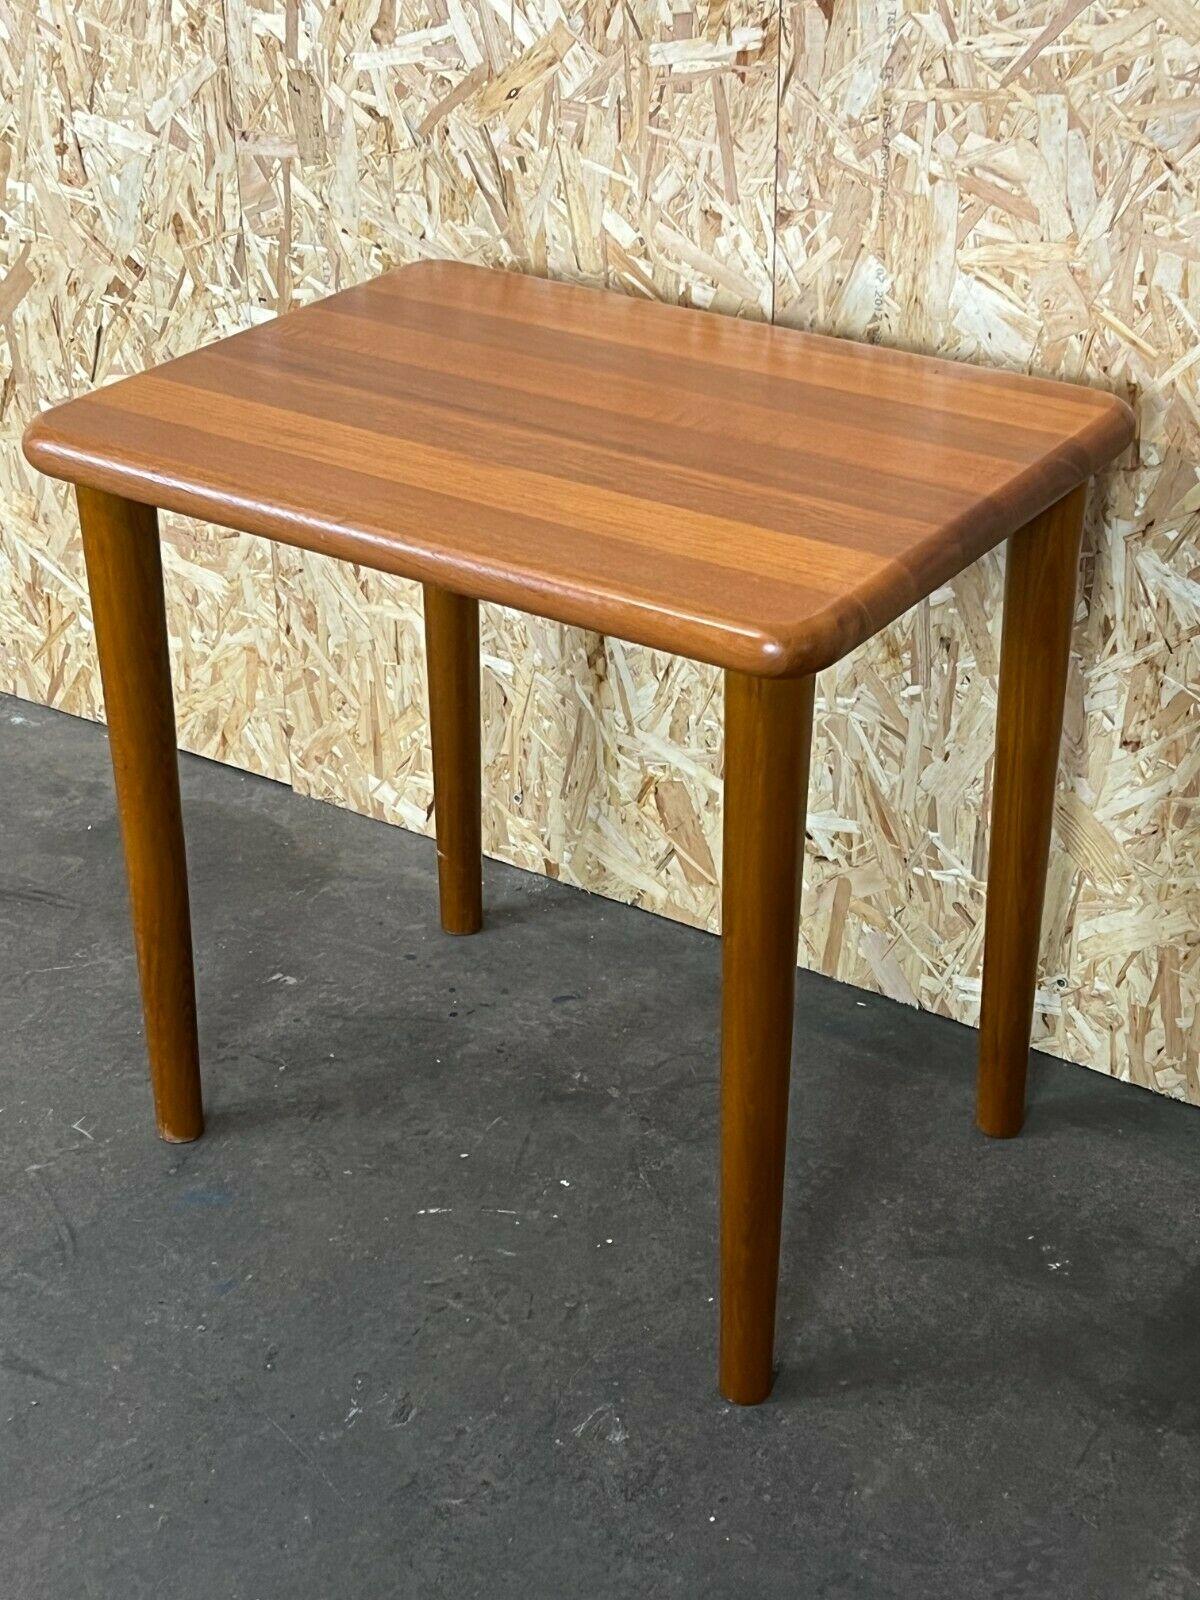 70s teak side table Glostrup Danish Design Denmark Mid Century

Object: side table

Manufacturer: Glostrup

Condition: good

Age: around 1960-1970

Dimensions:

74.5cm x 55cm x 71cm

Other notes:

The pictures serve as part of the